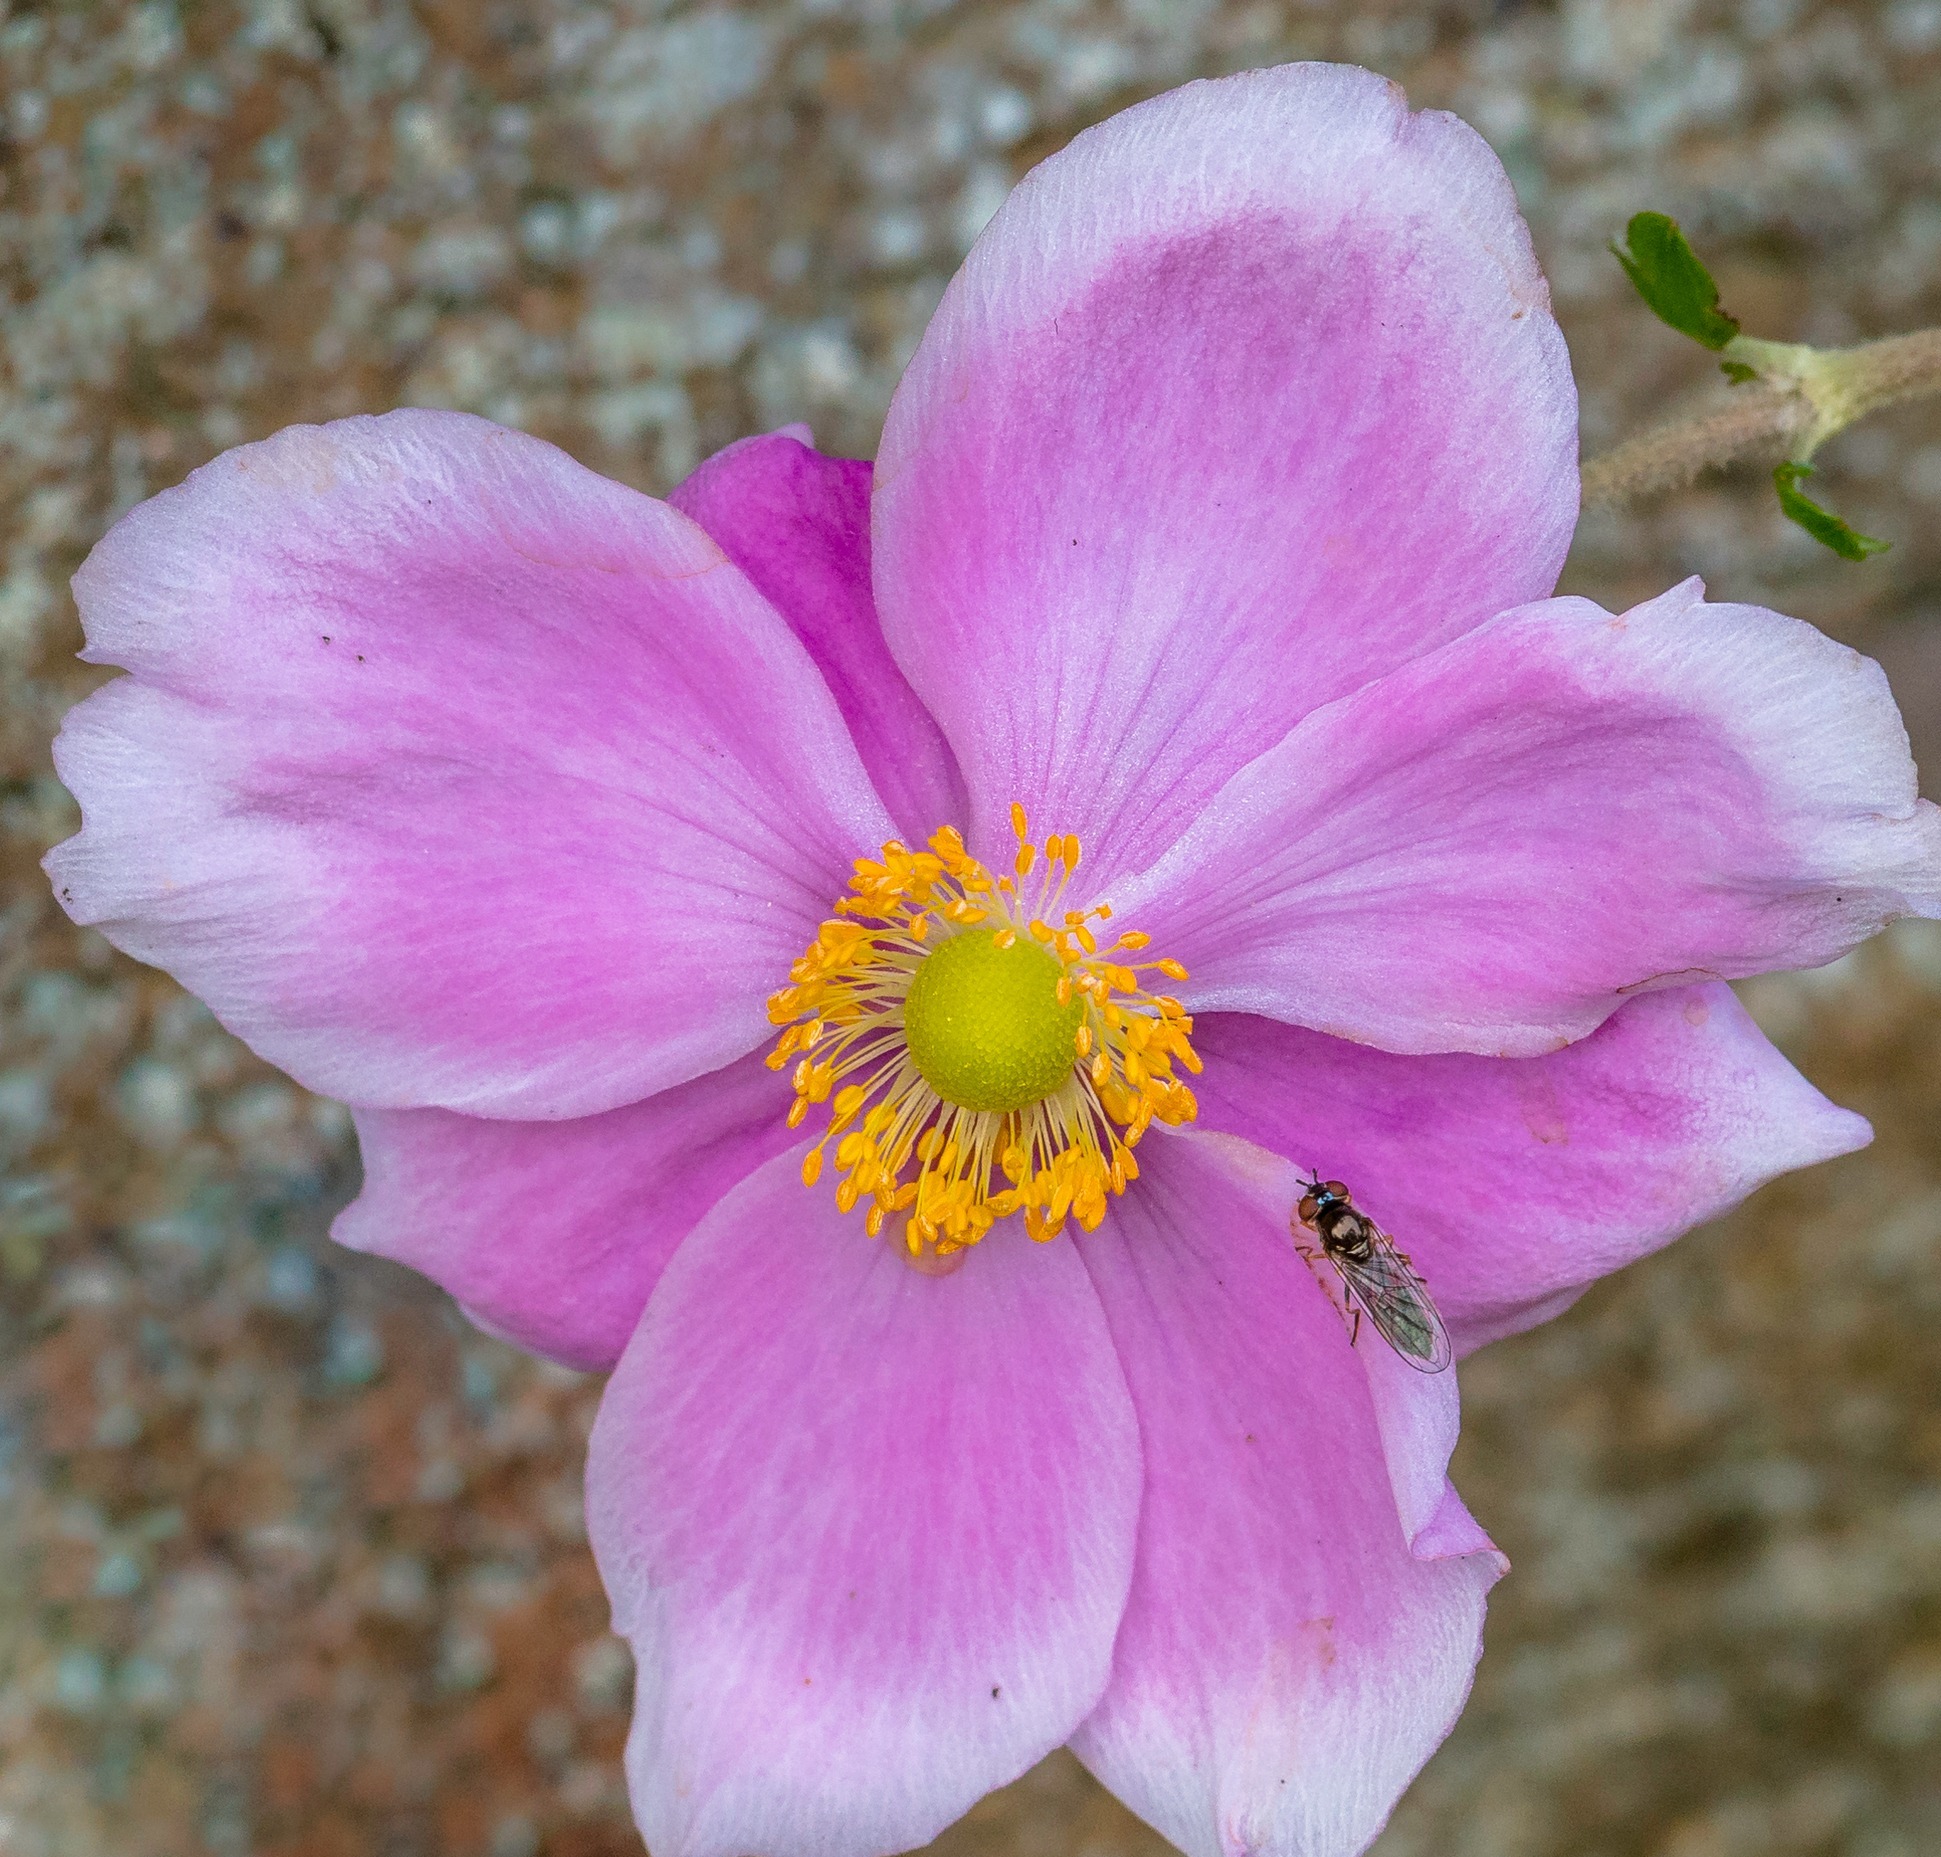 A Japanese anemone by Alan Bailey